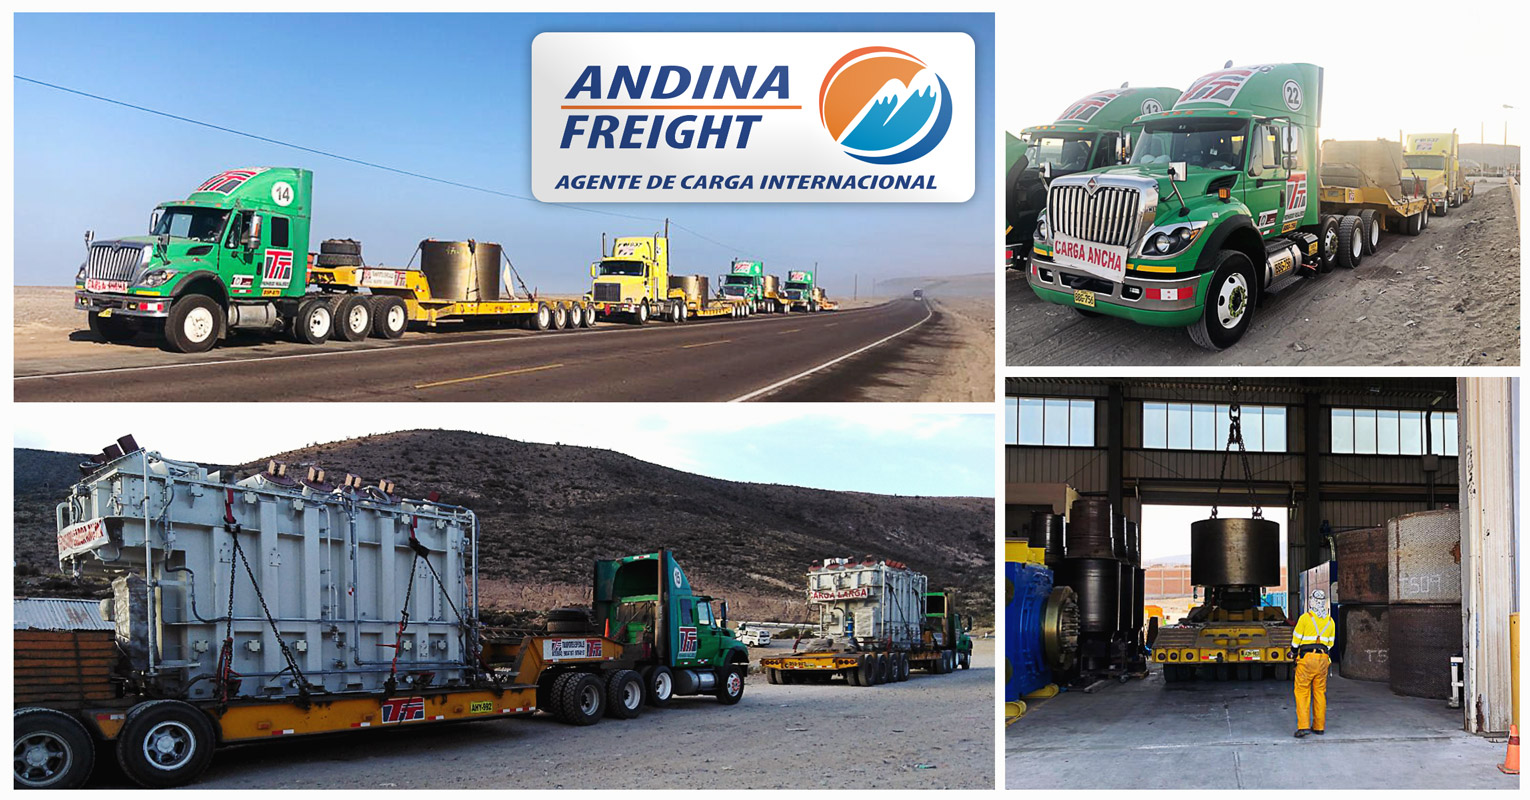 Andina Freight Peru Handled 4 Rollers Weighing 70 Tons Each from Italy to Matarani Peru Including Positioning on Site